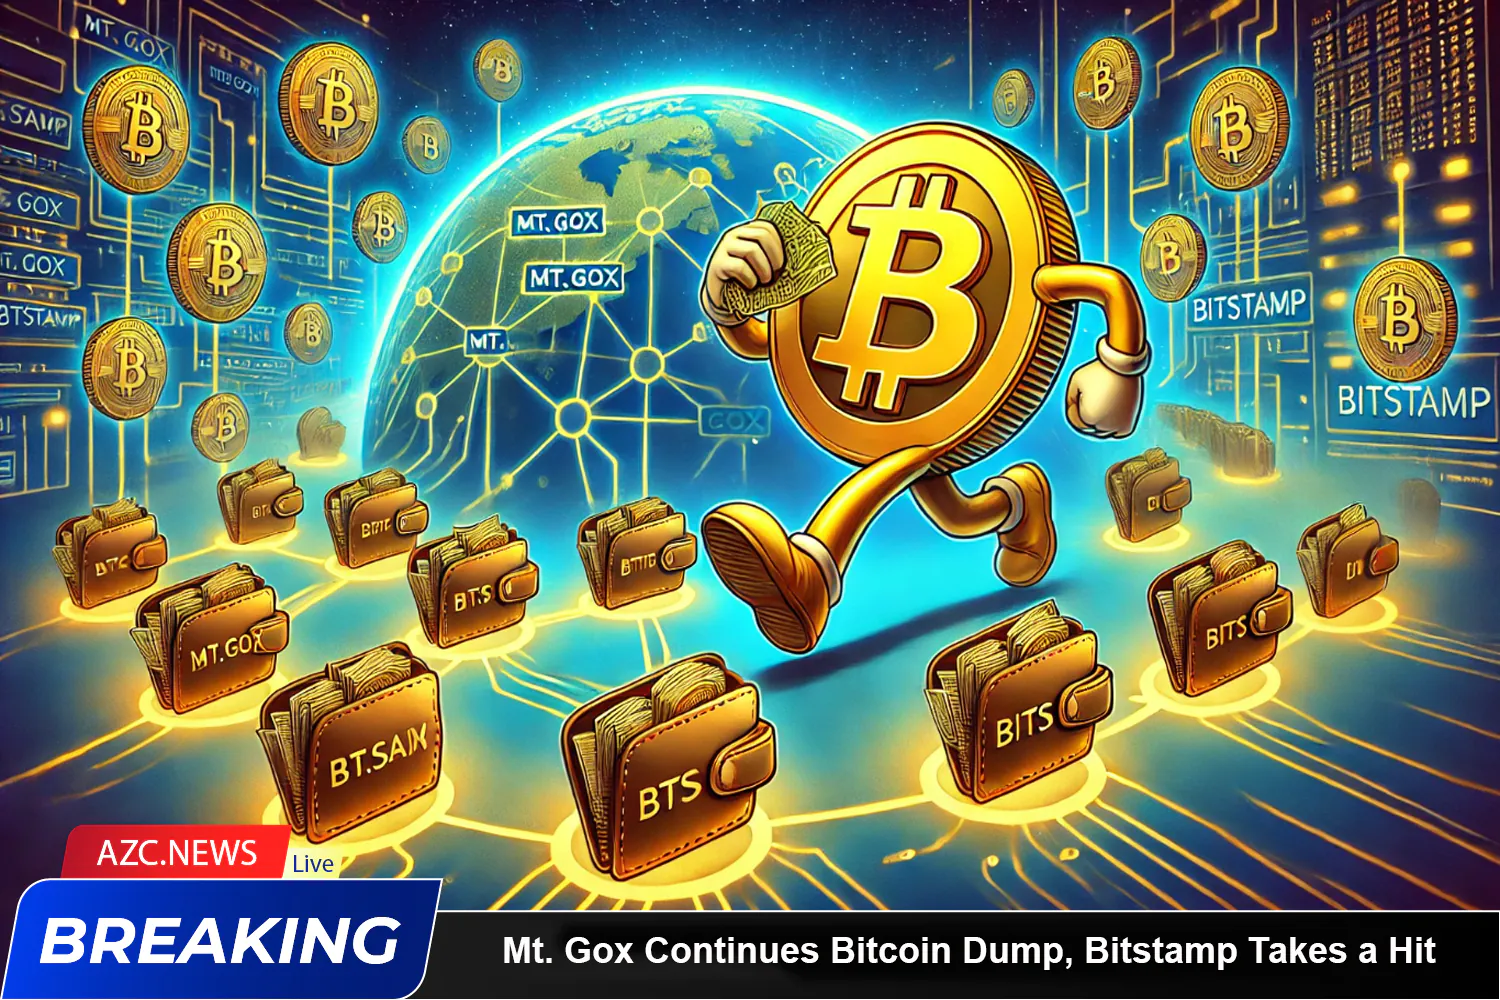 Mt Gox Continues Bitcoin Dump, Bitstamp Takes A Hit